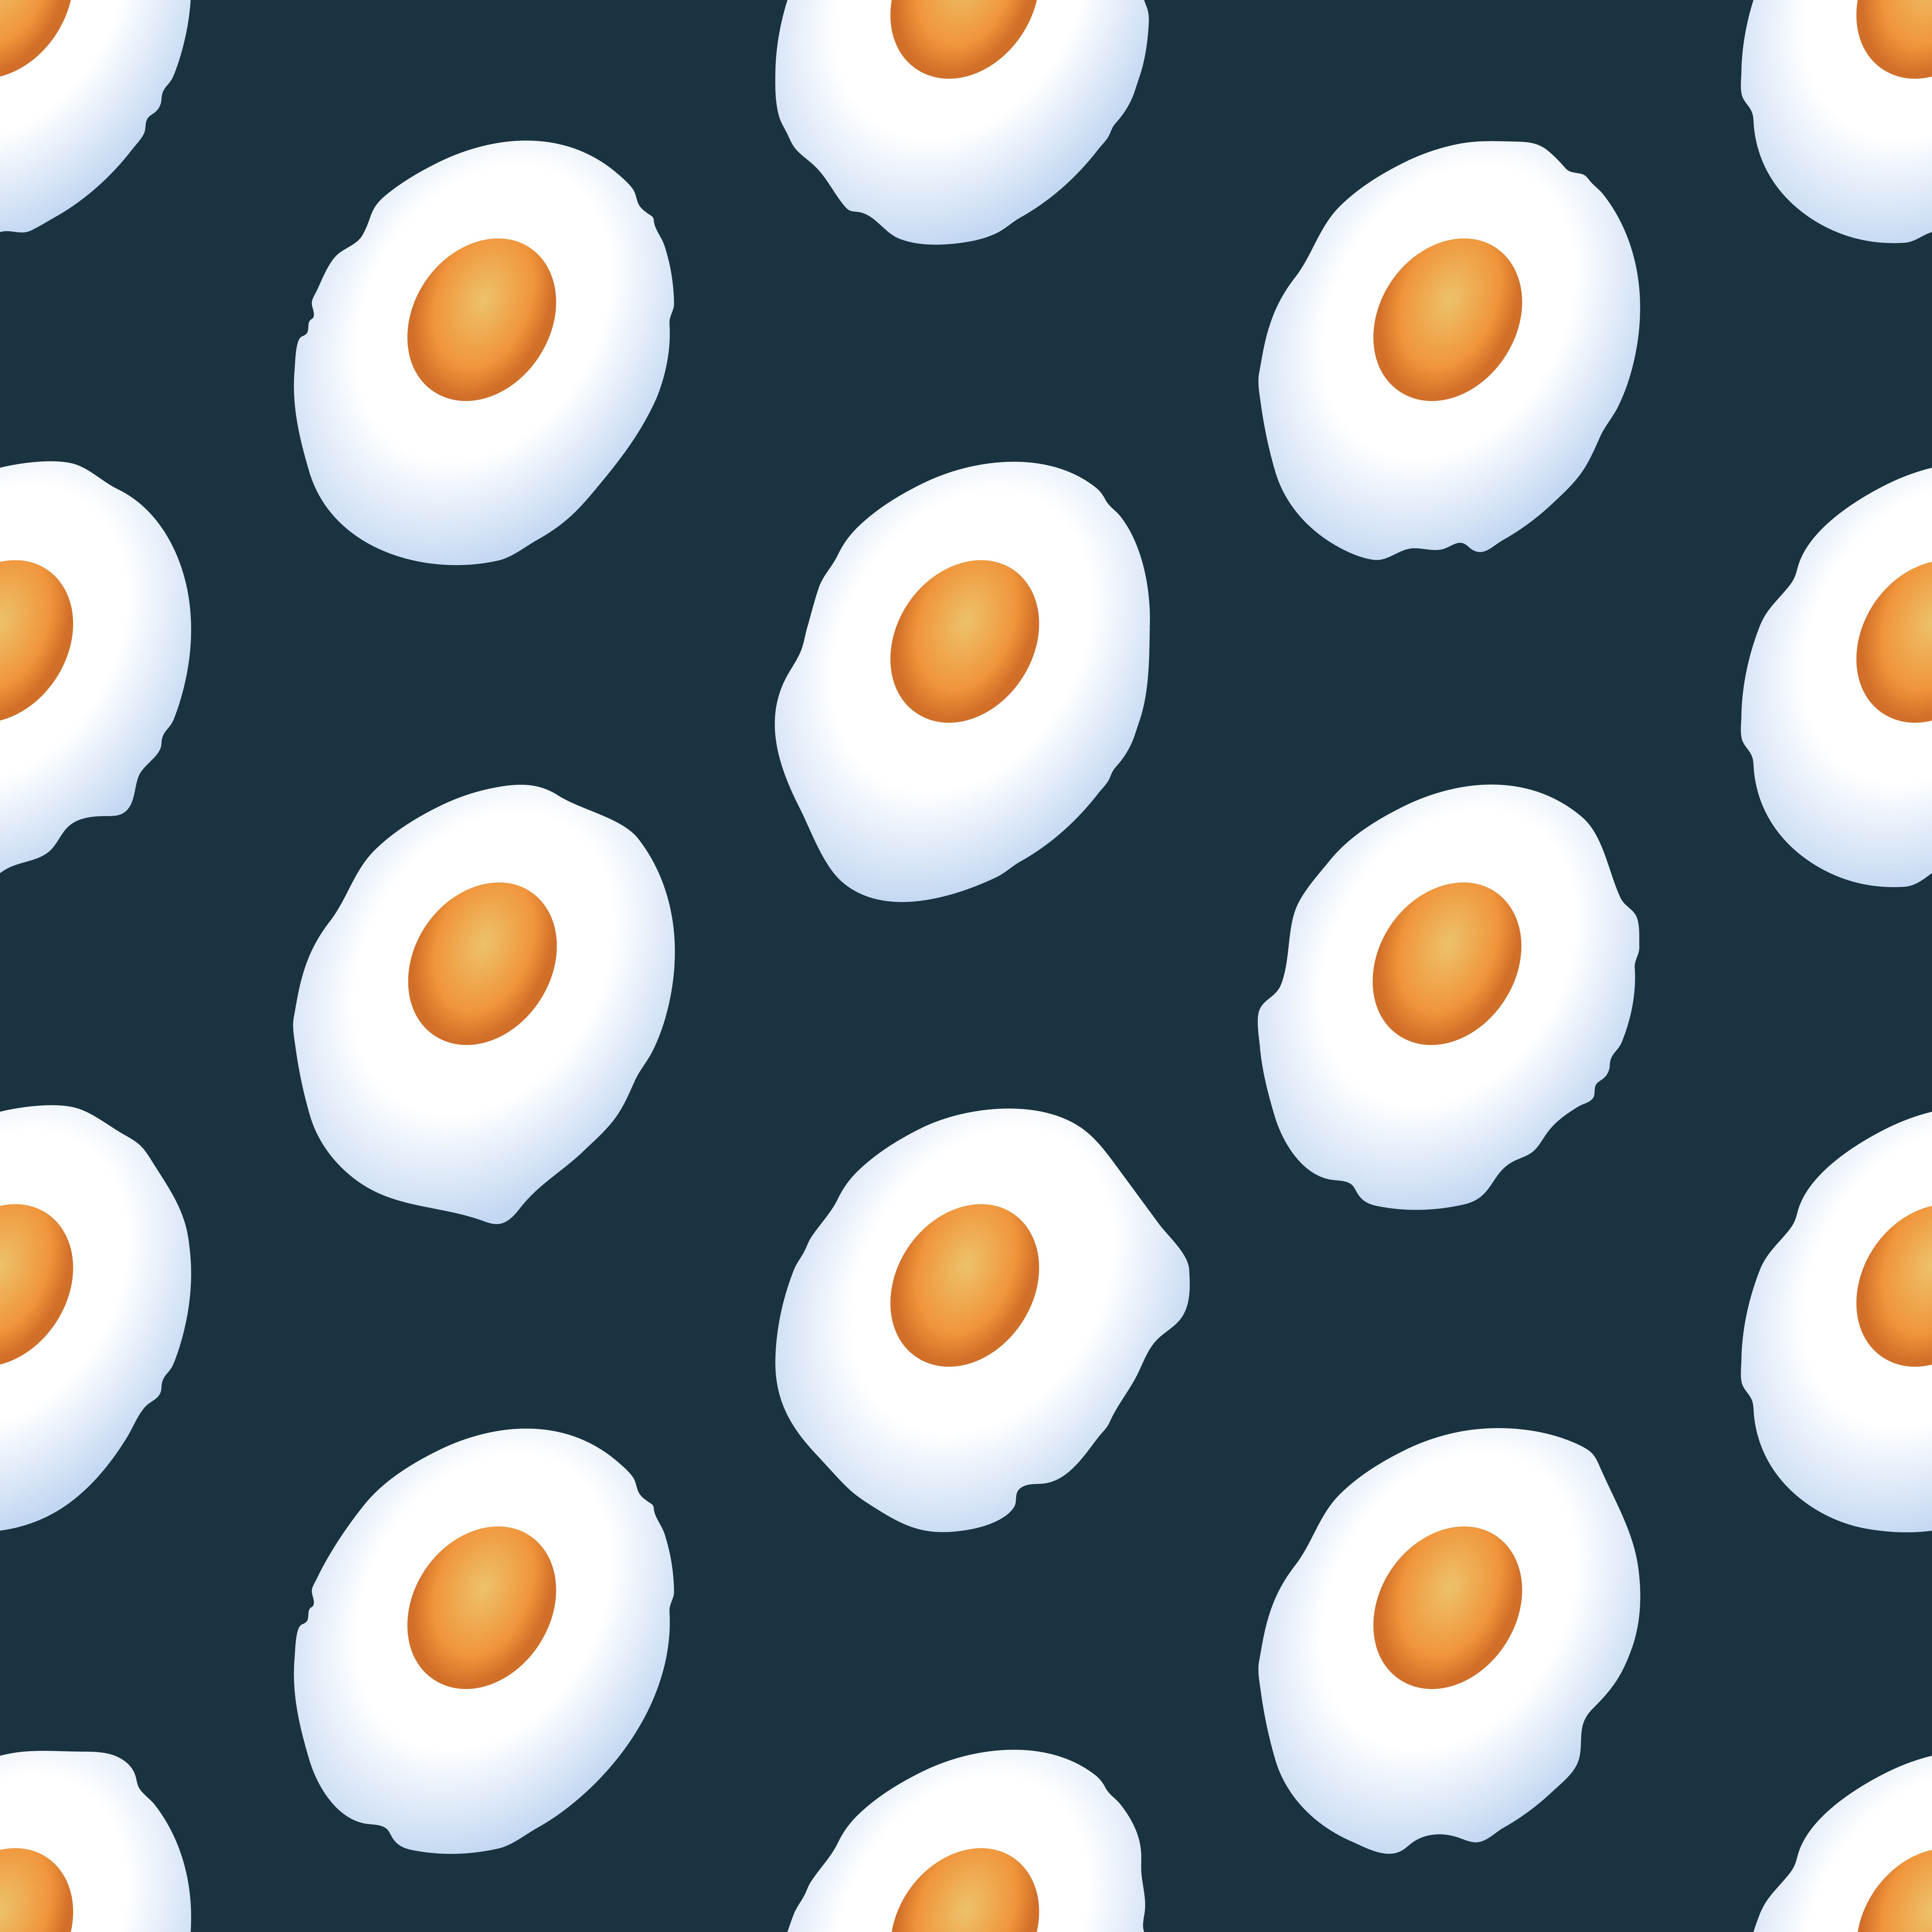 Fried eggs flat vector seamless pattern. Morning food, fast cooking dish on dark background. Healthy breakfast. Natural organic farm product